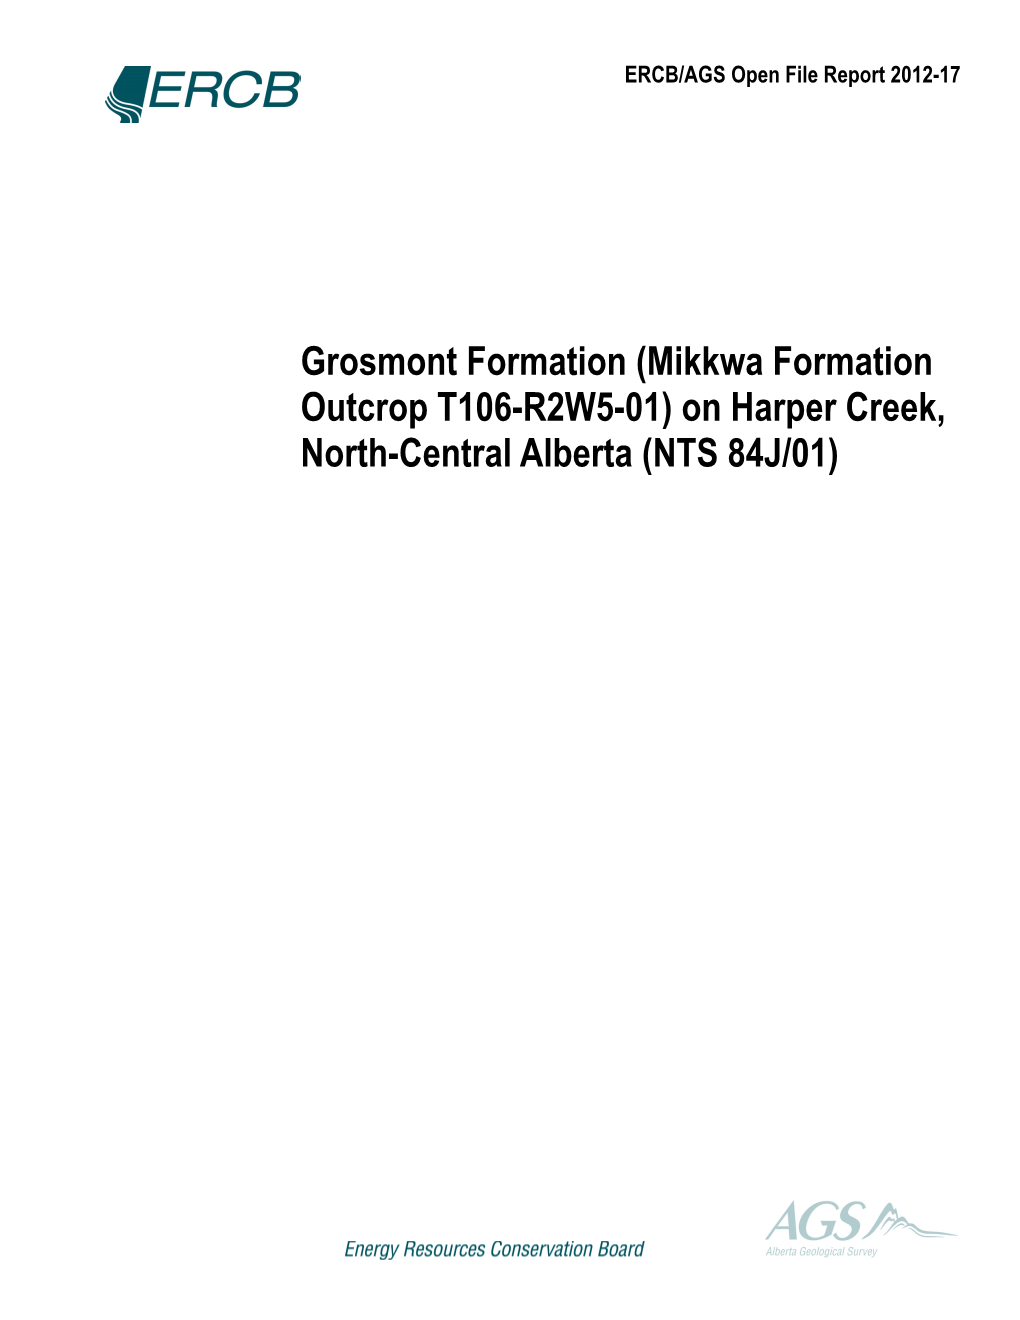 Grosmont Formation (Mikkwa Formation Outcrop T106-R2W5-01) on Harper Creek, North-Central Alberta (NTS 84J/01) ERCB/AGS Open File Report 2012-17